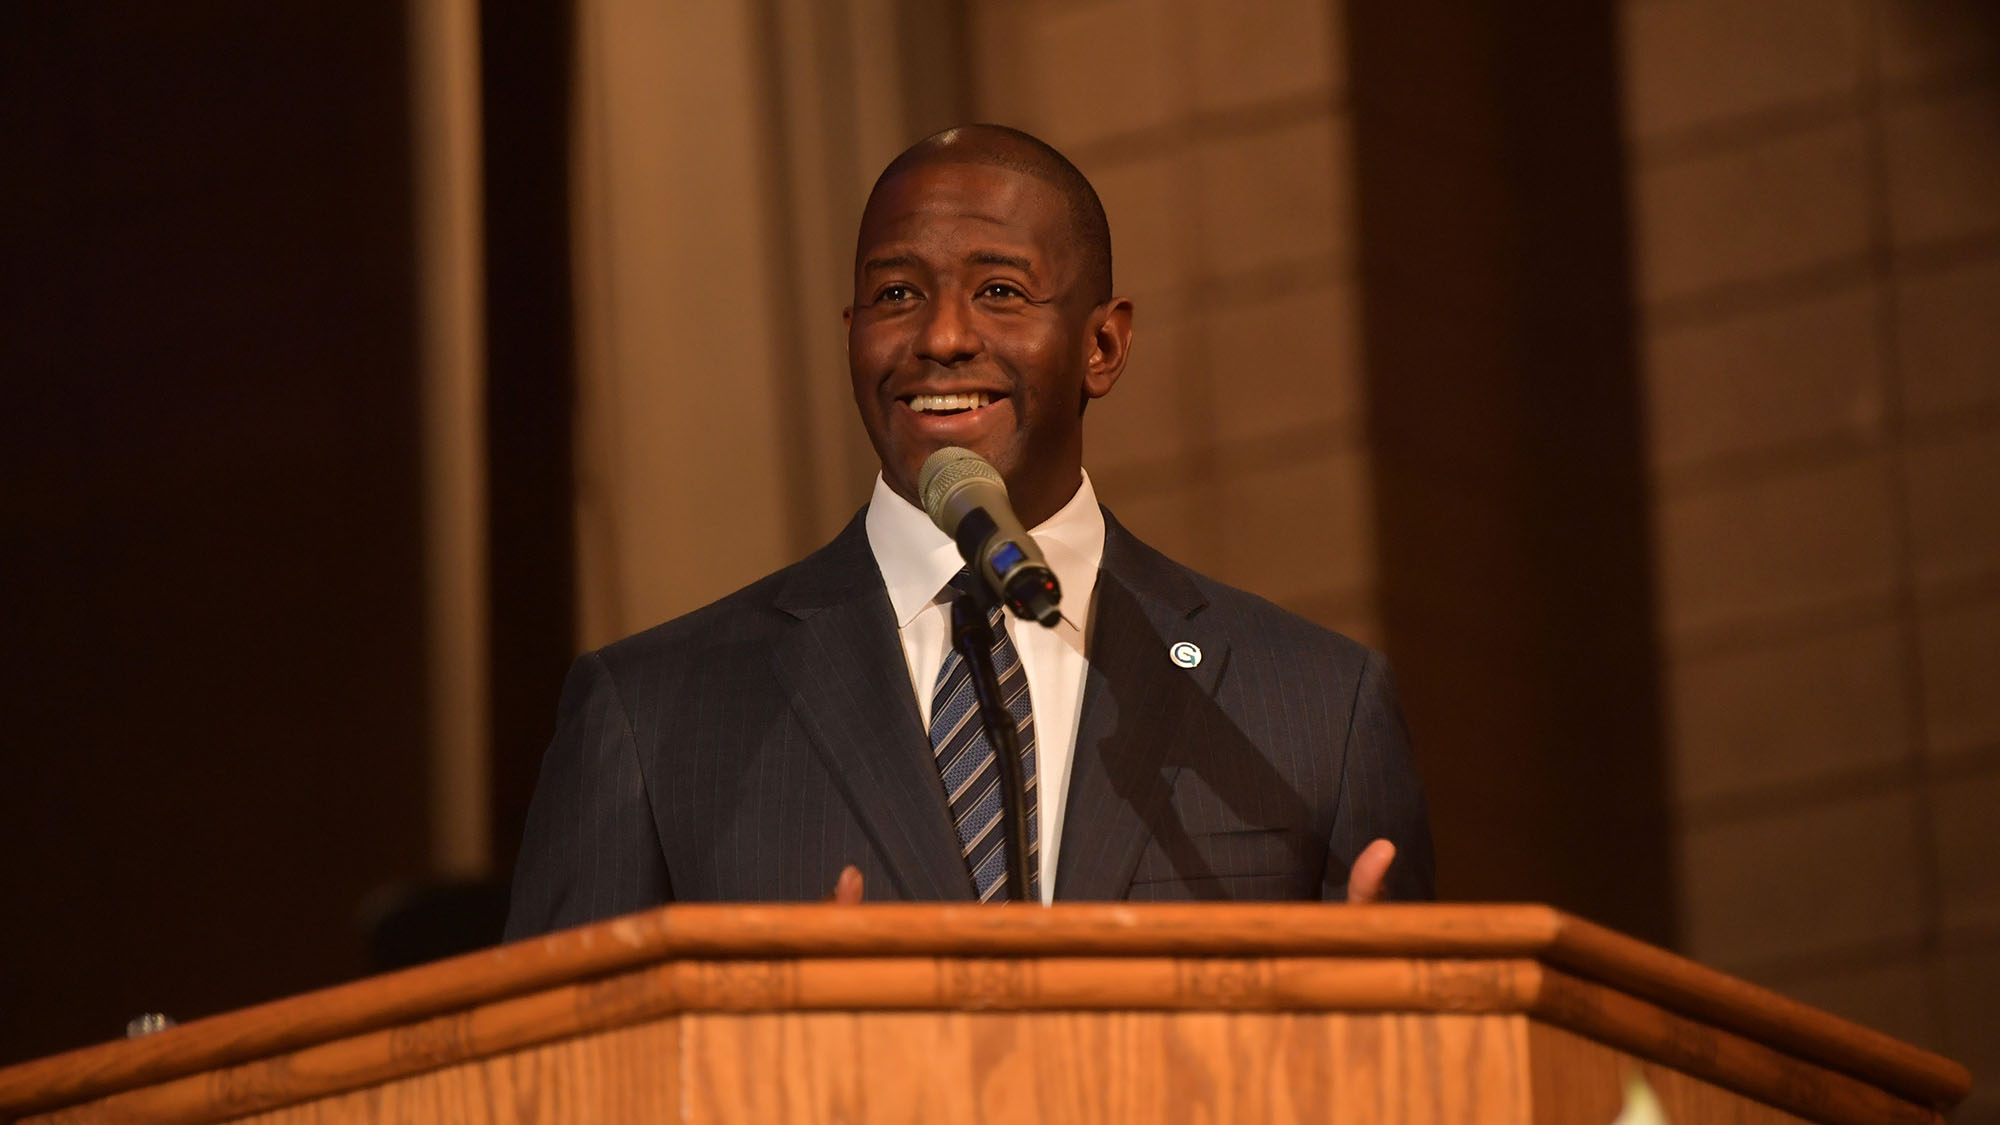 Gillum Rallies Supporters to Defend Voting Rights as Contentious